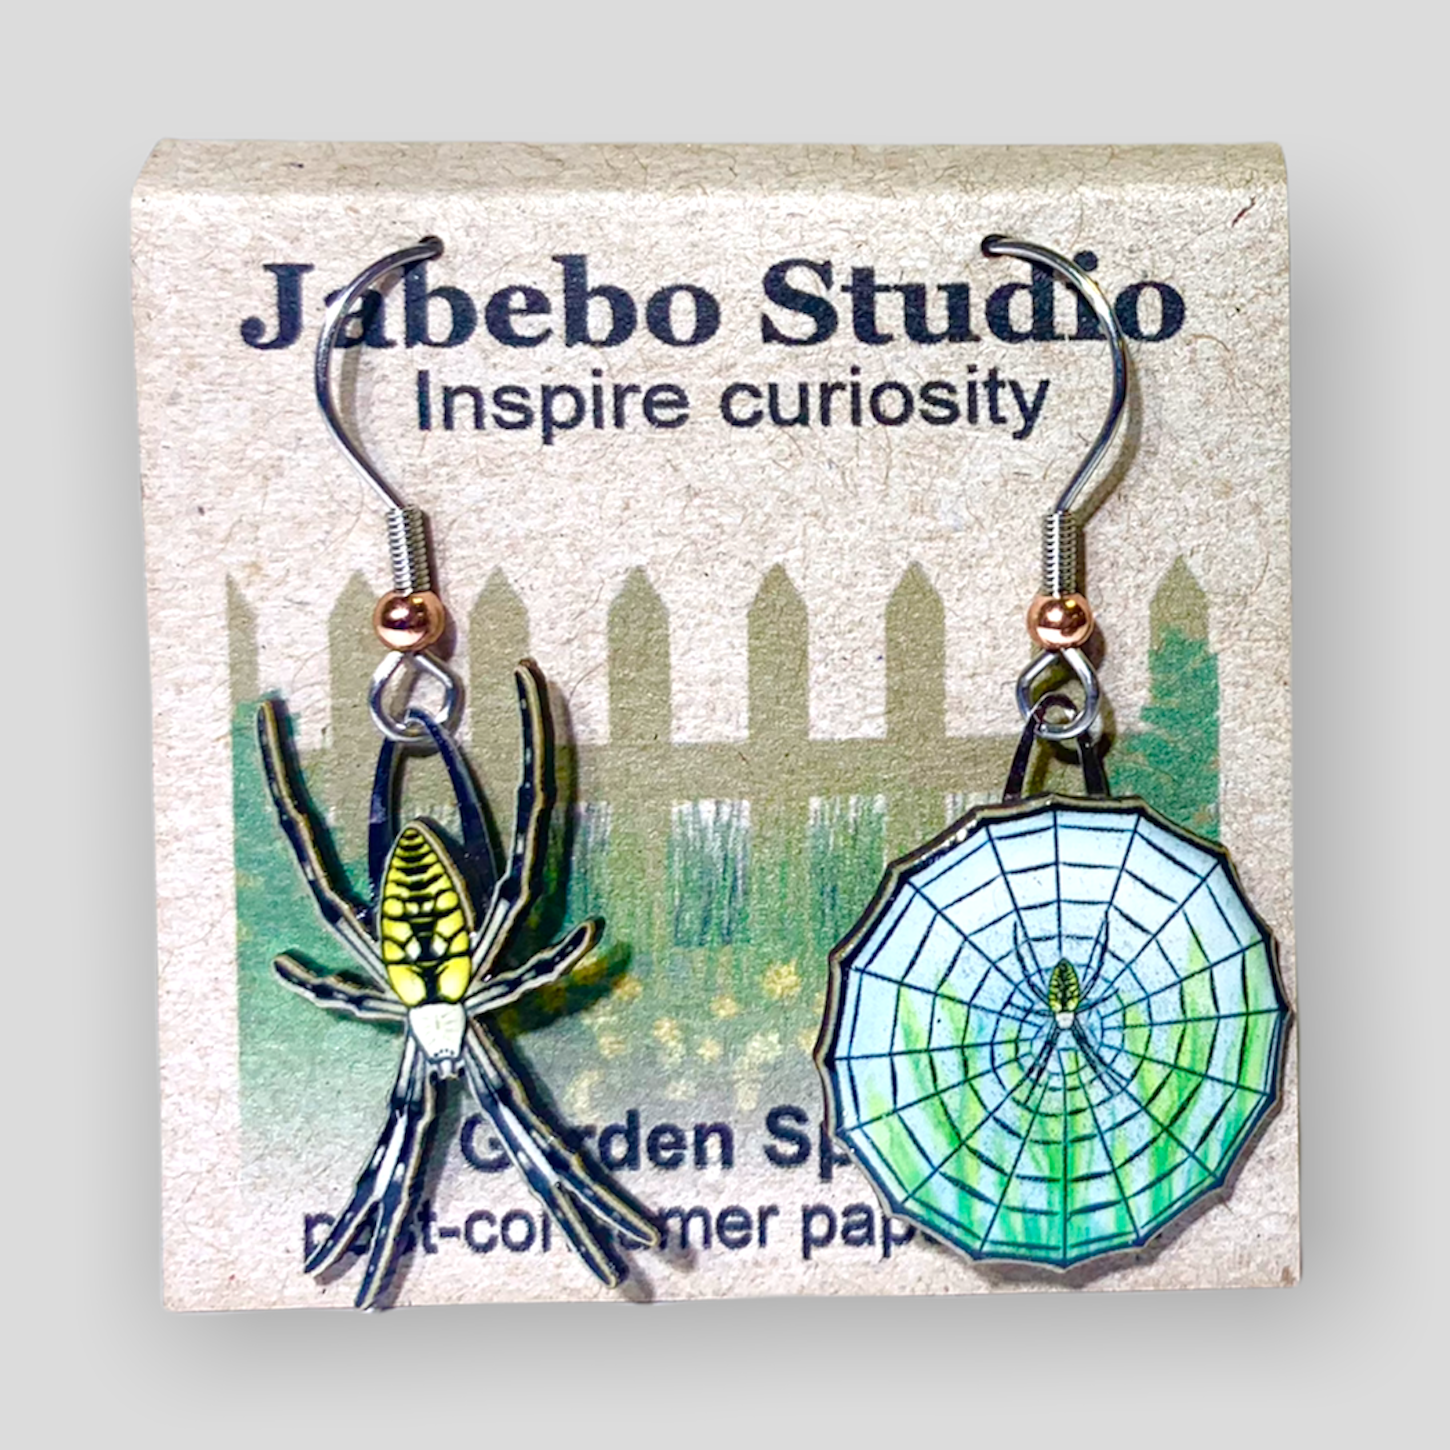 Picture shown is of 1 inch tall pair of earrings of the arachnid the Garden Spider